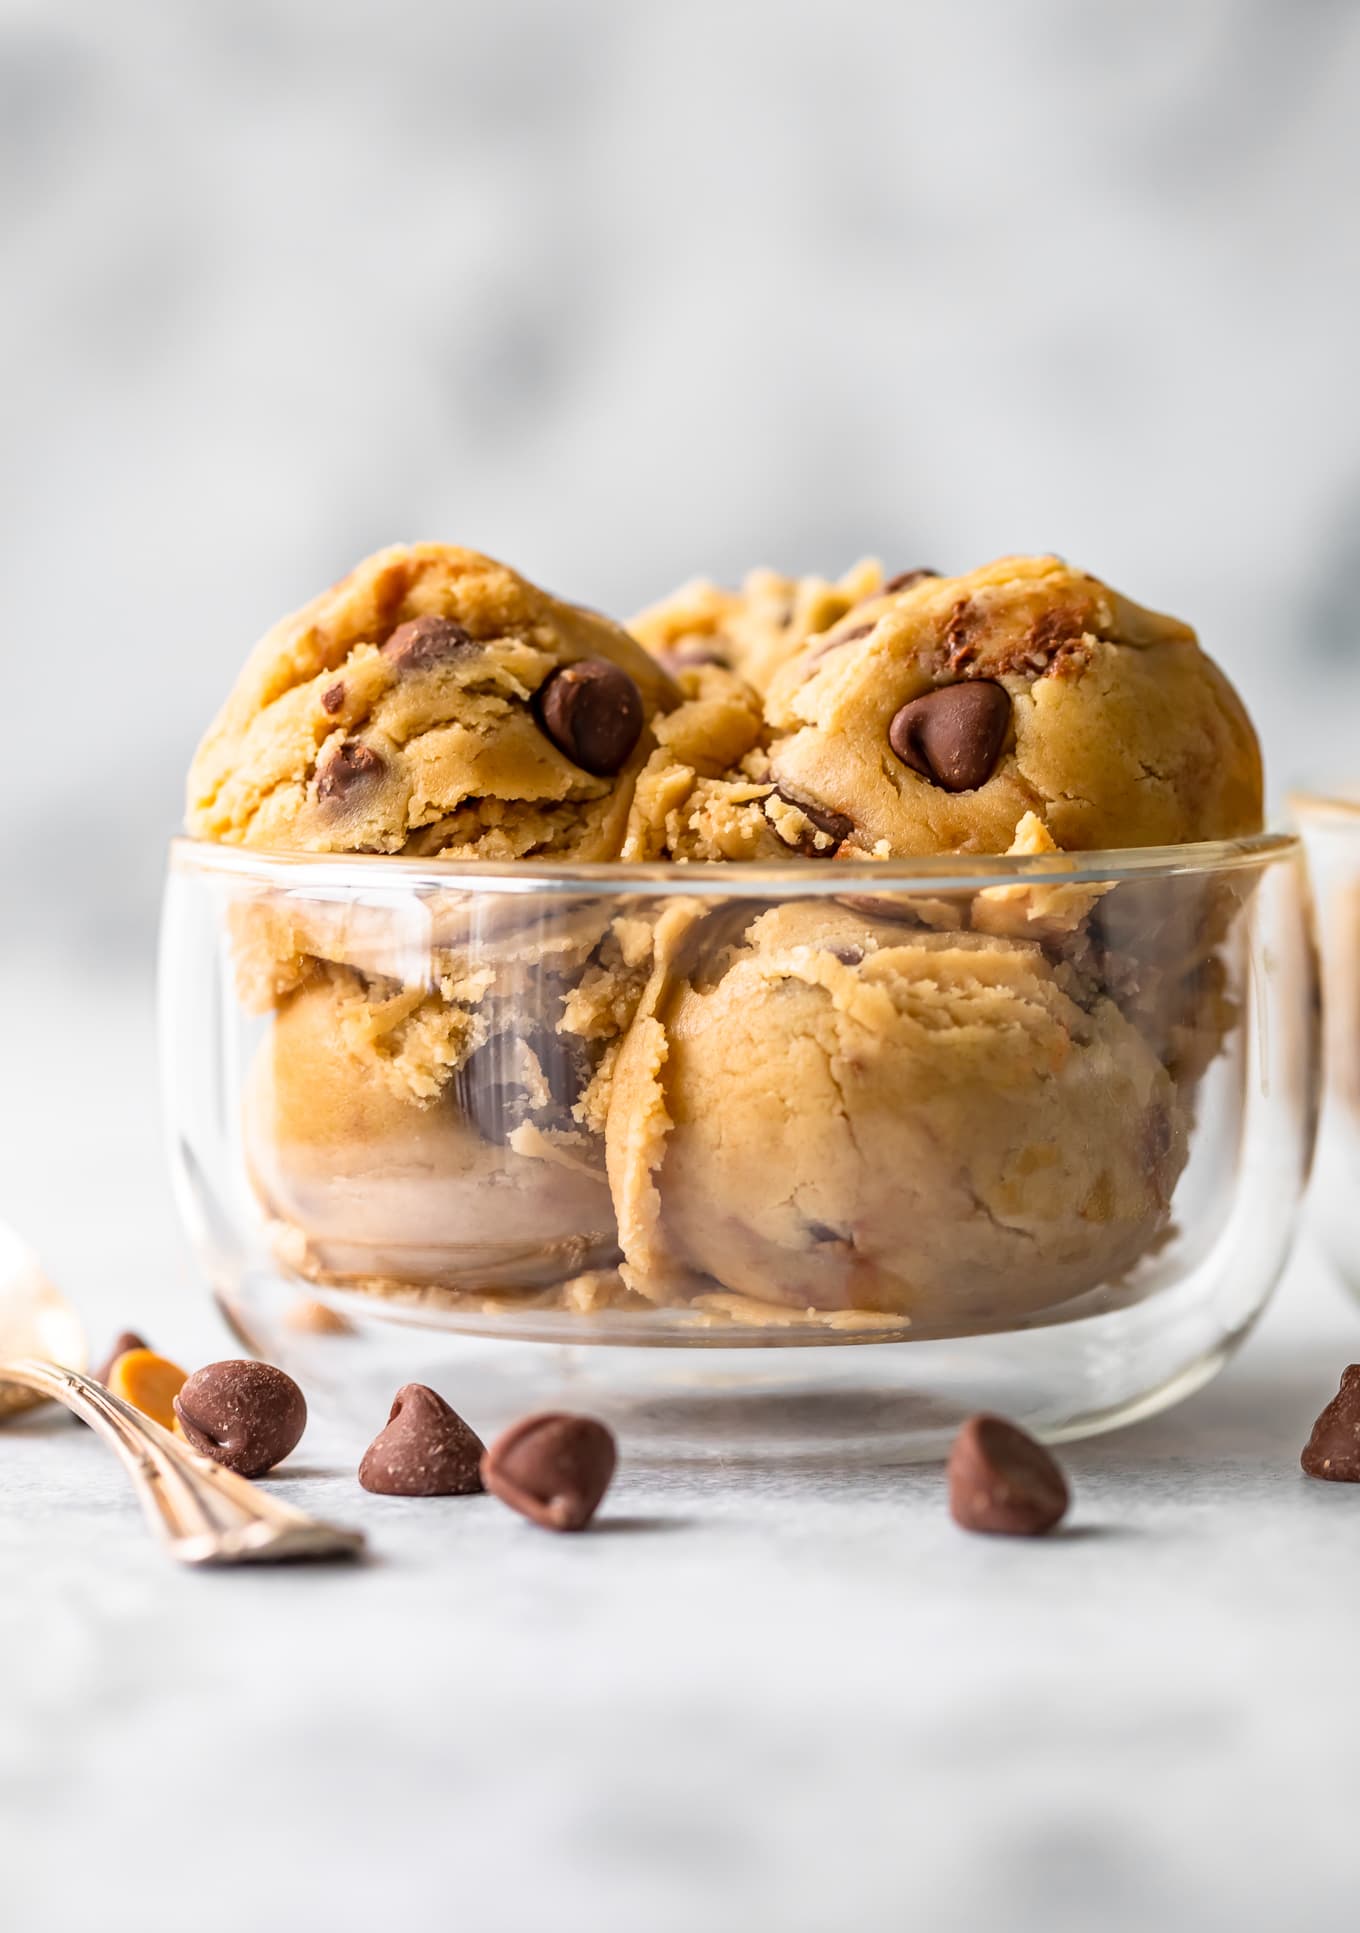 edible cookie dough with chocolate chips